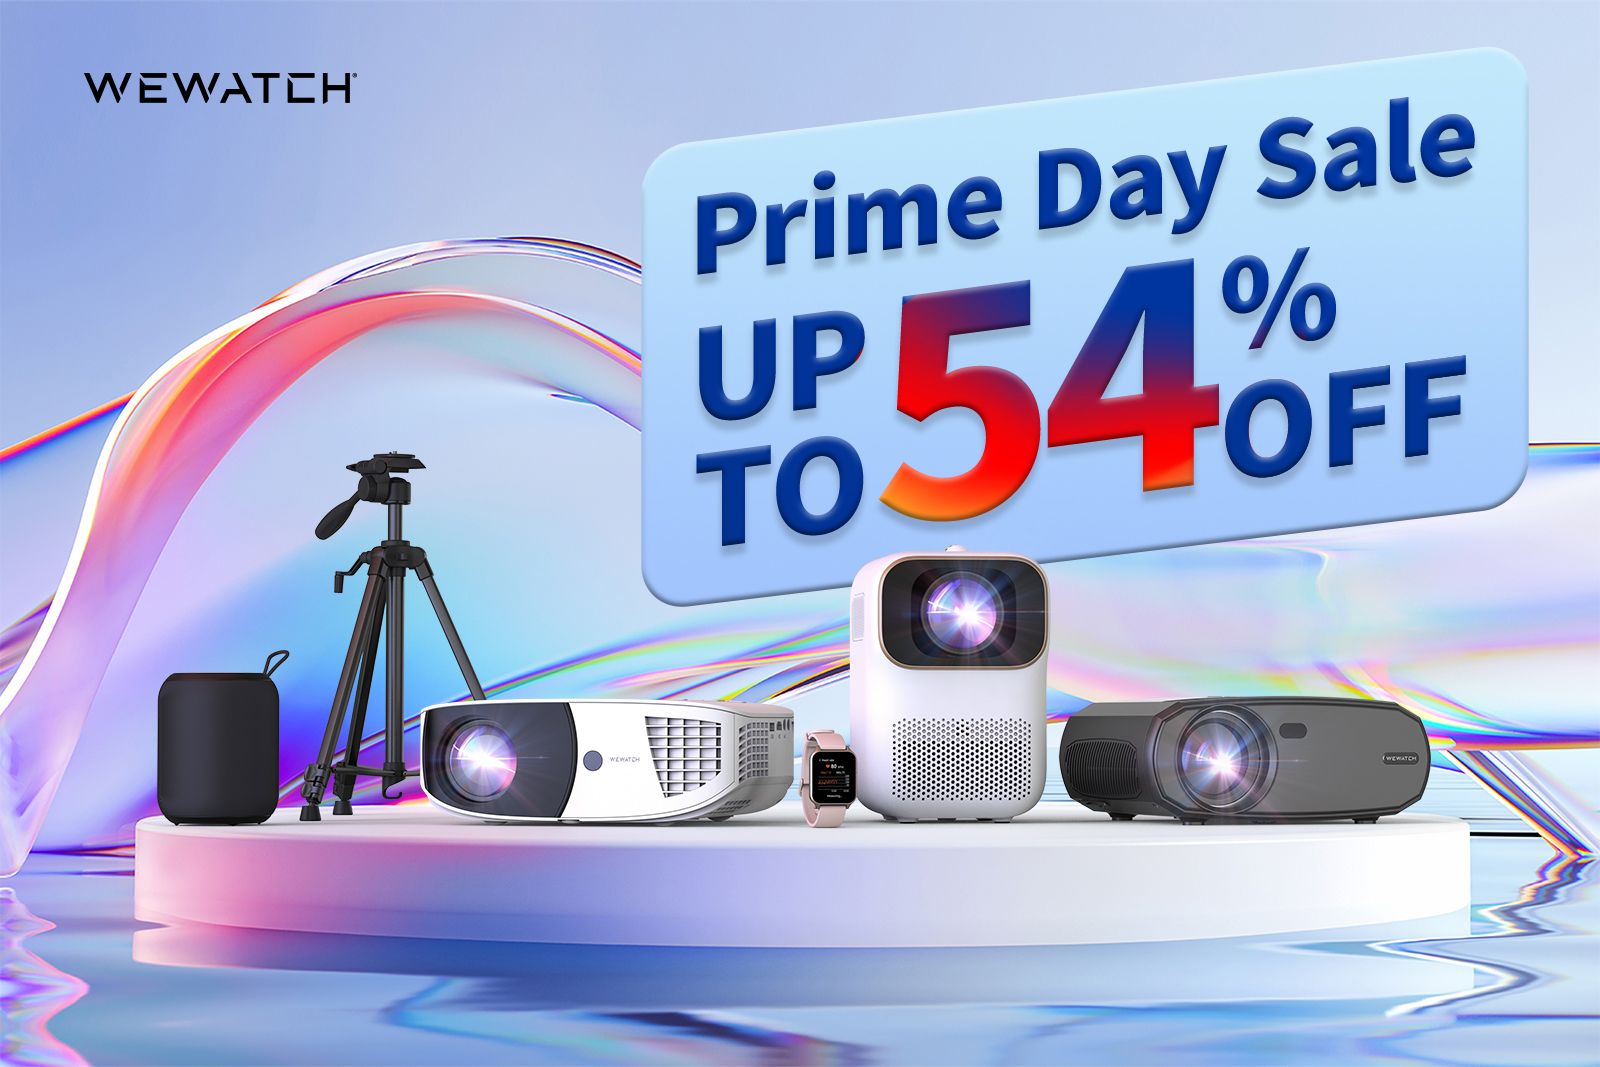 Wewatch offers up to 45% off on smart projectors and other accessories for Prime Day photo 2